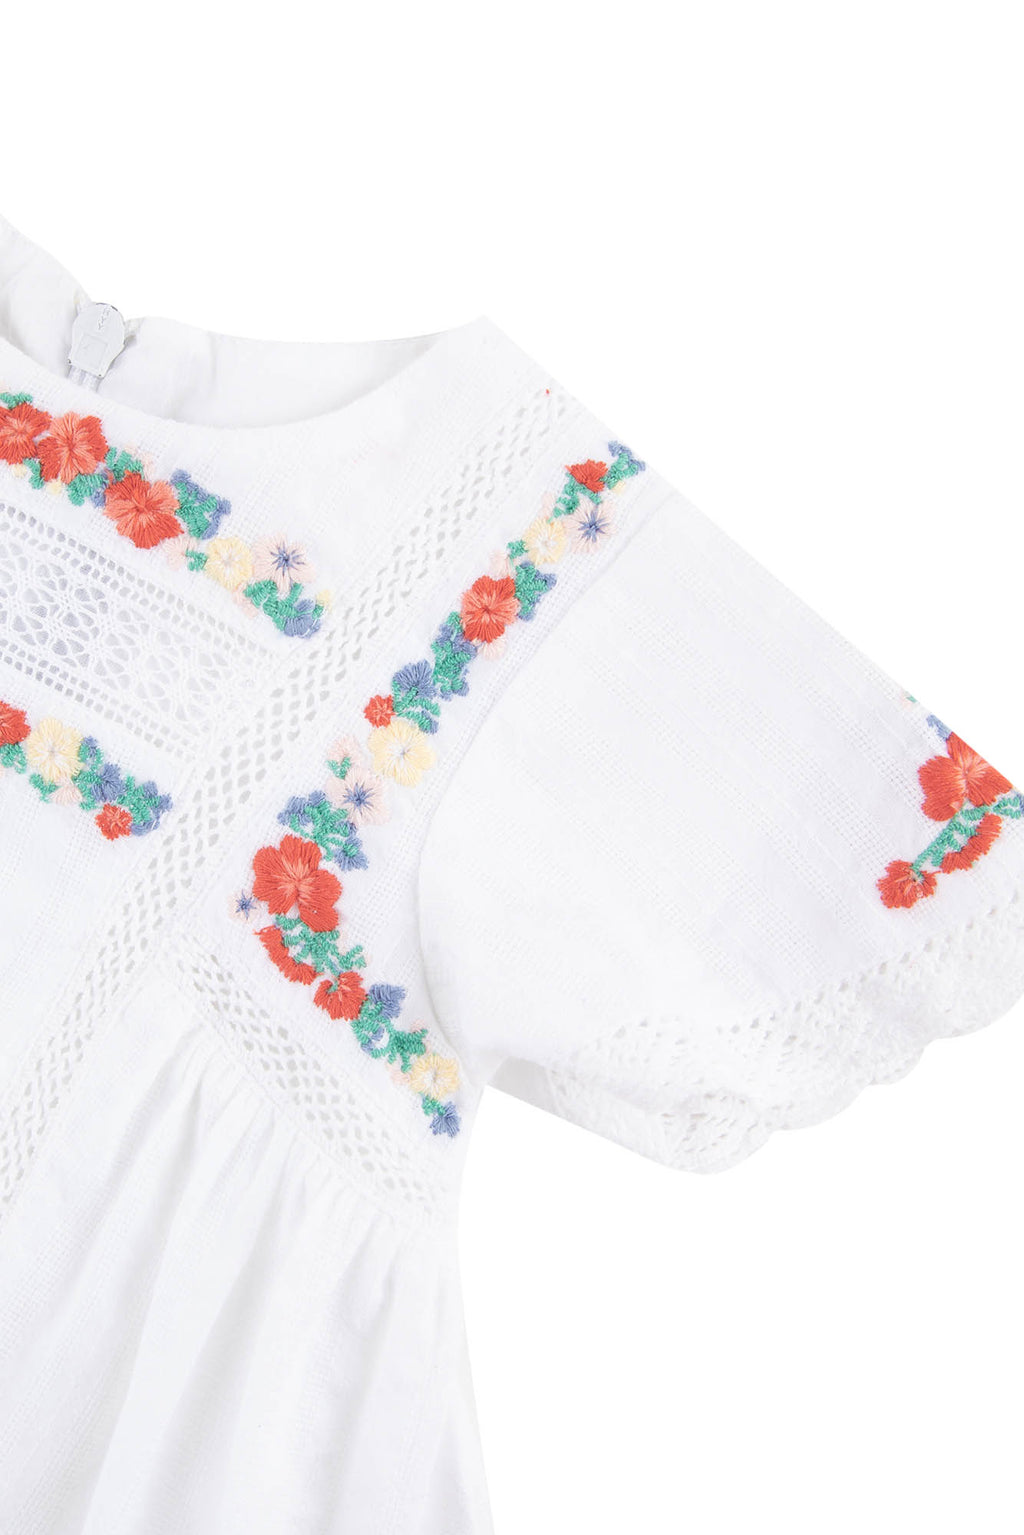 Dress - White Flower embroidery